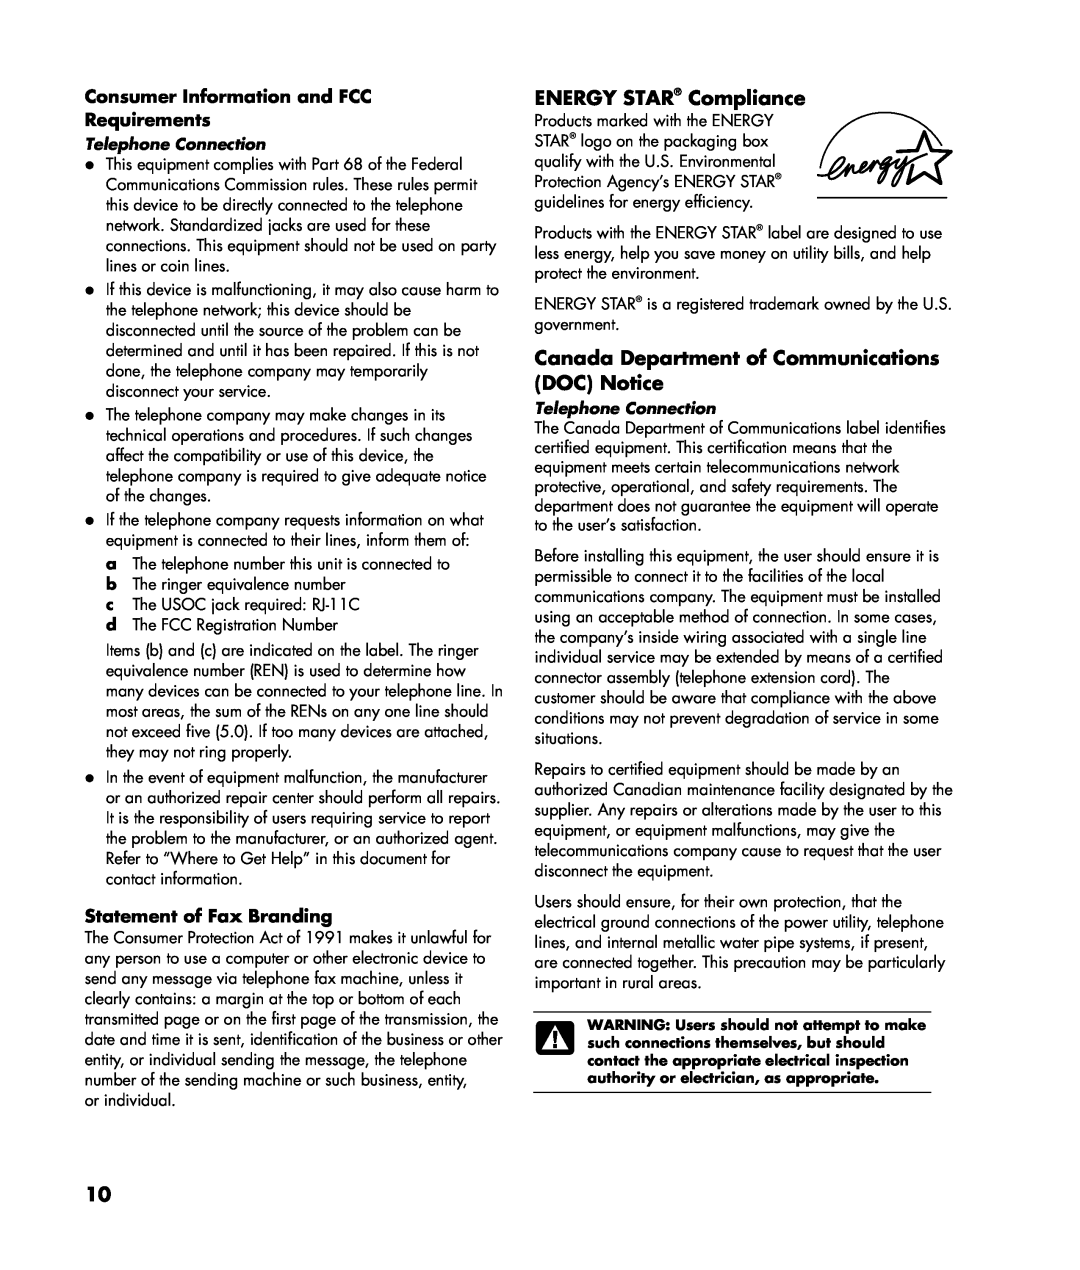 HP SR2050NX, a1644x manual ENERGY STAR Compliance, Canada Department of Communications DOC Notice, Statement of Fax Branding 